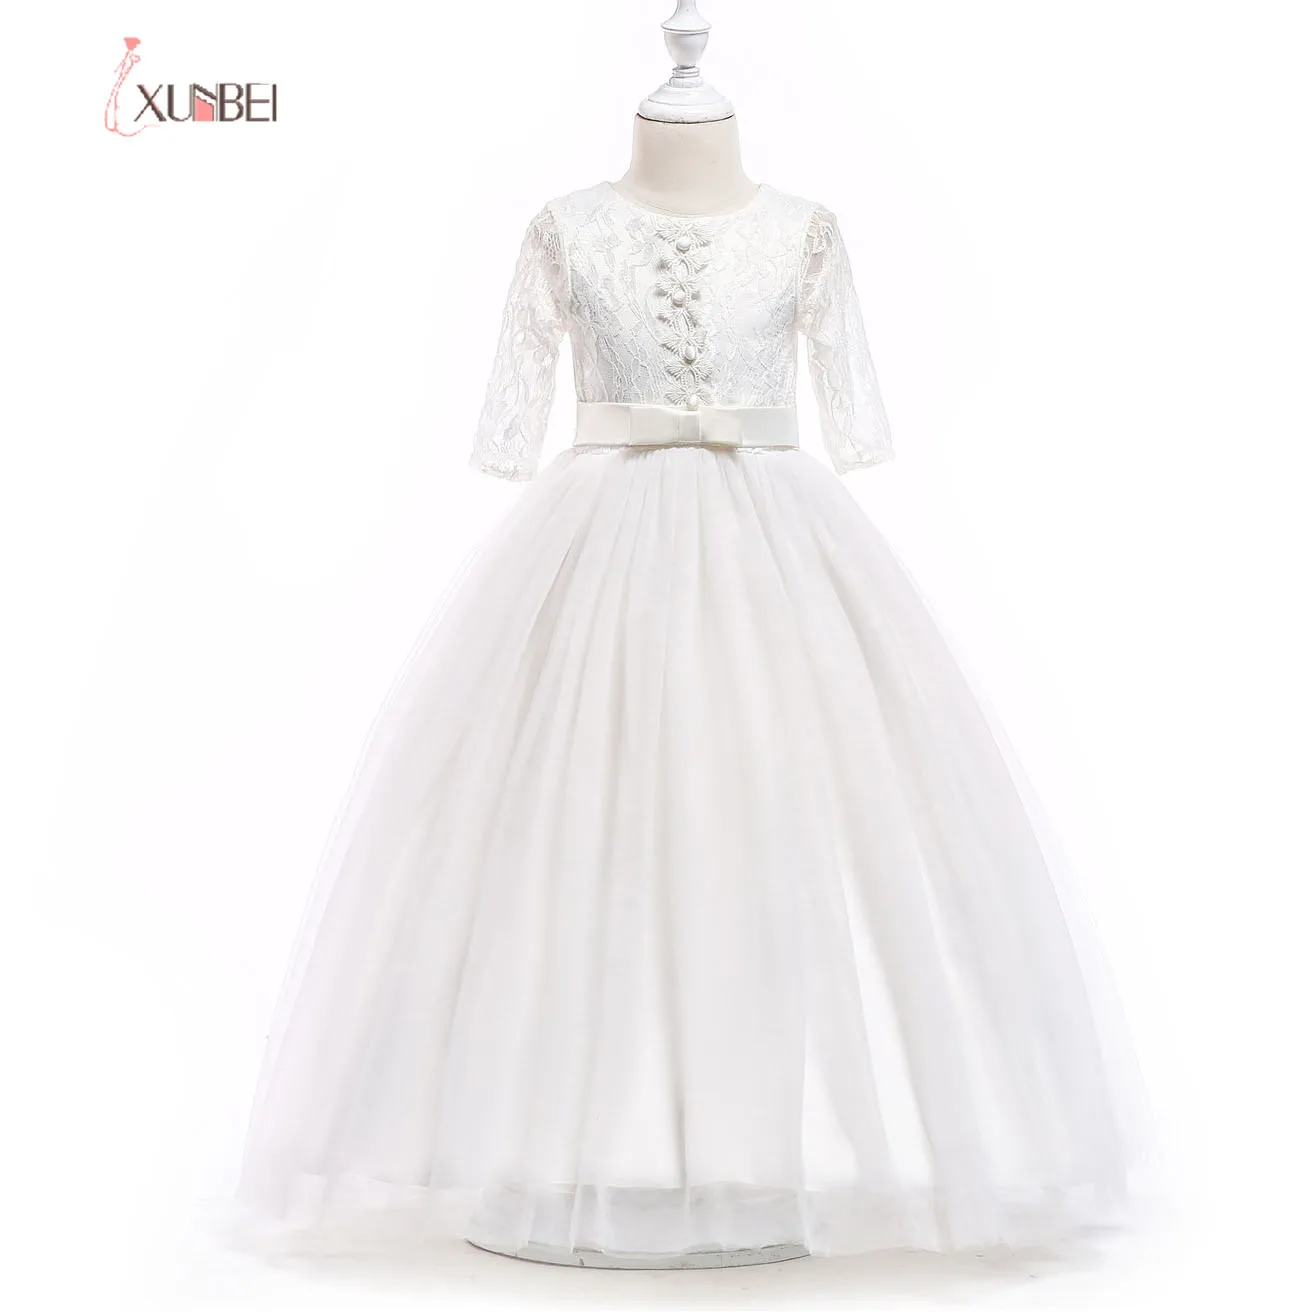 

BABYONLINE Floor Length Princess Tulle Flower Girl Dresses Lace Girls Pageant Dresses First Communion Dresses Party Gown Vestido